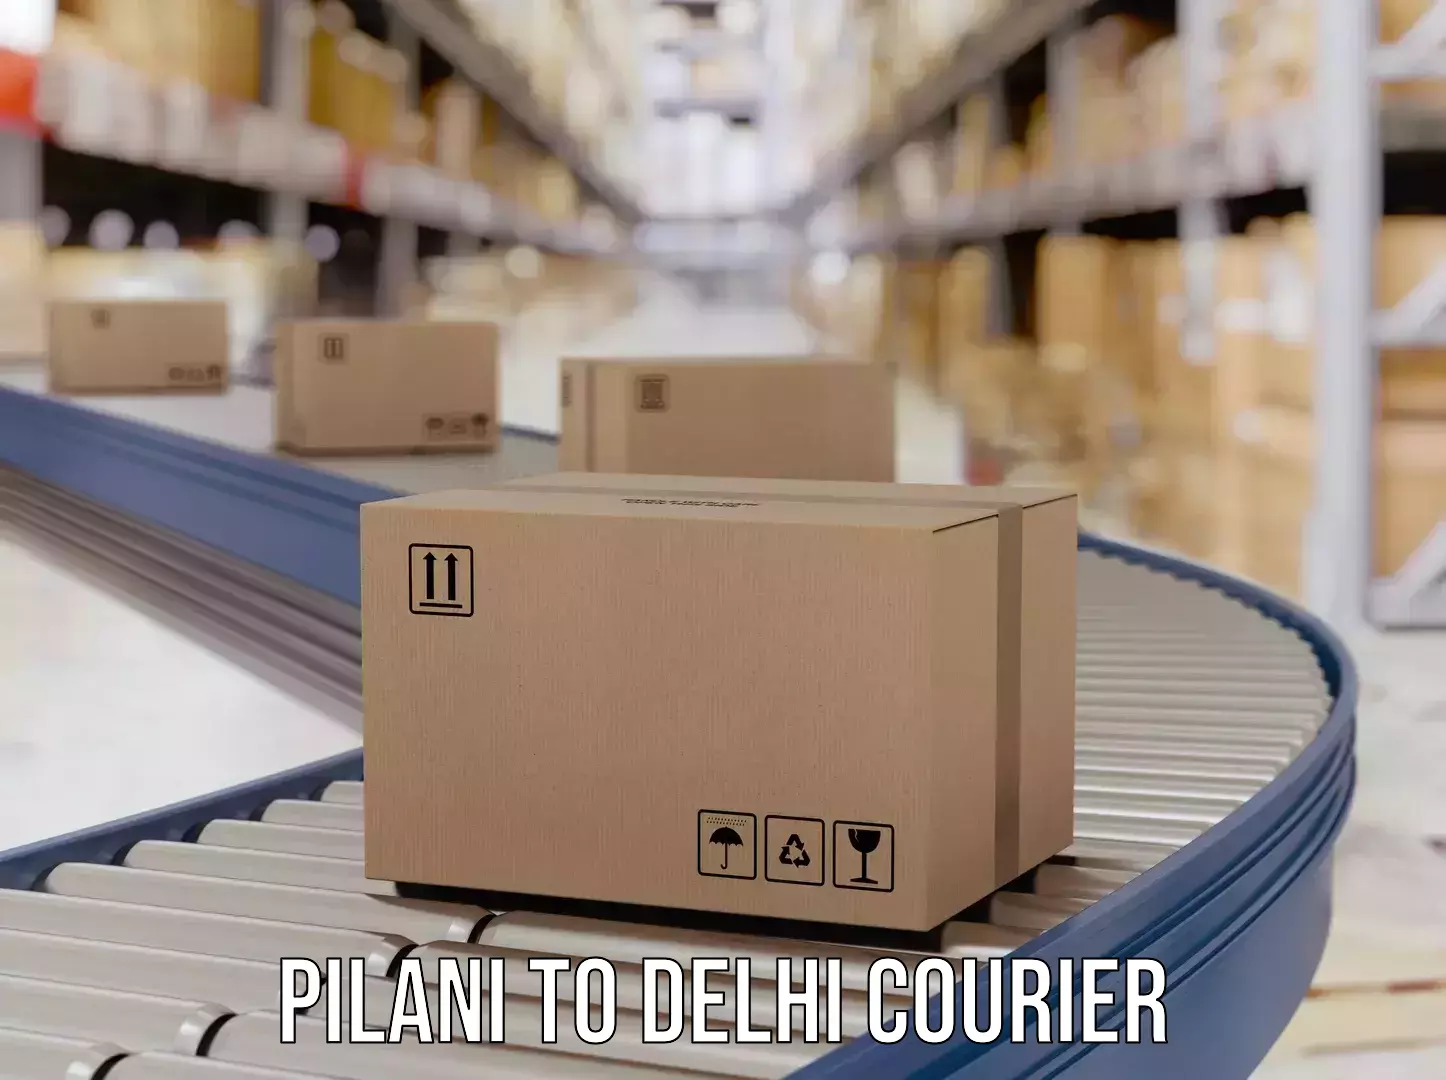 International courier networks Pilani to NCR